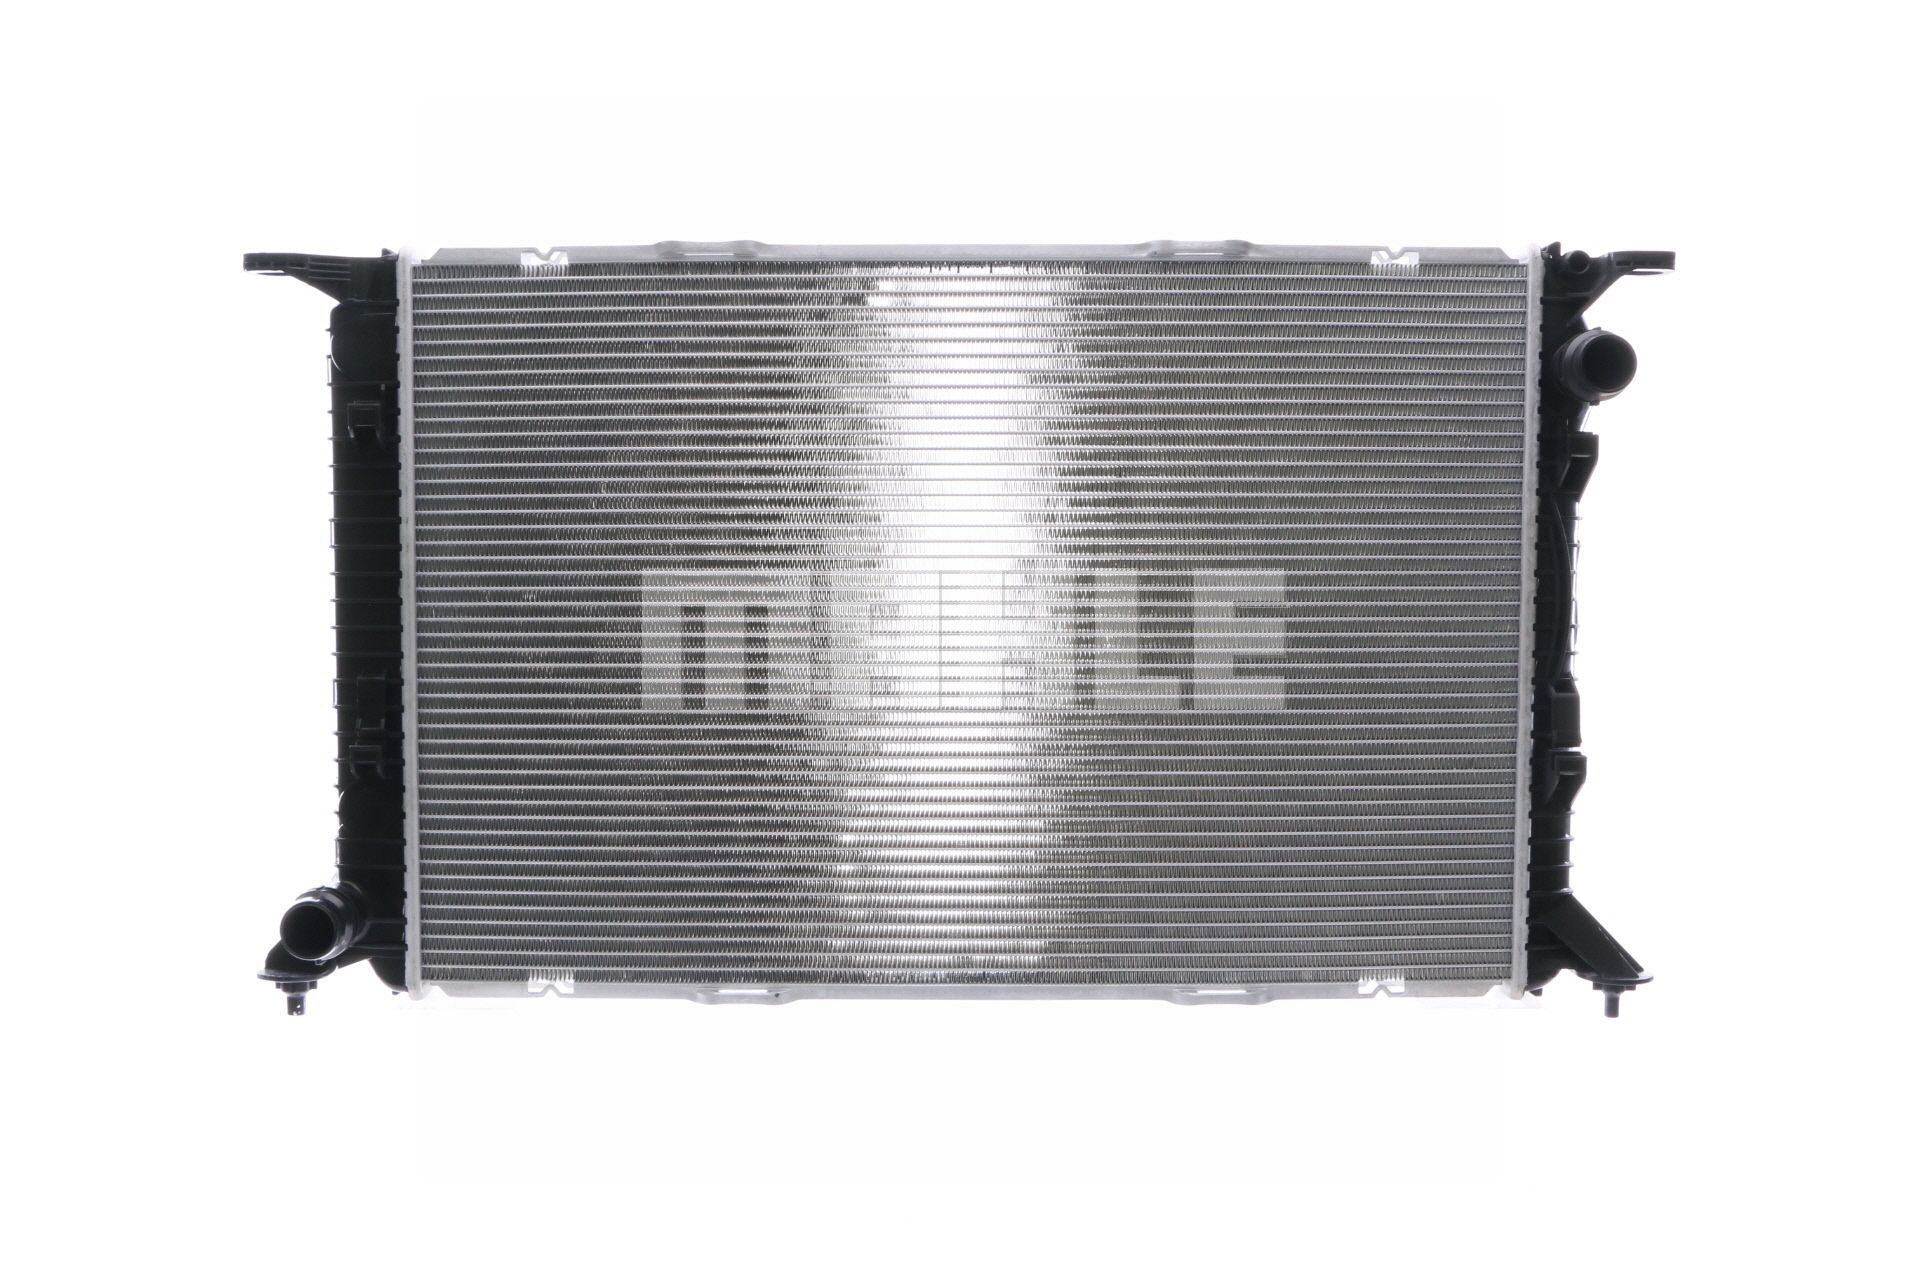 376754734 MAHLE ORIGINAL for vehicles with/without air conditioning, 720 x 468 x 32 mm, Manual Transmission, Brazed cooling fins Radiator CR 1132 000S buy